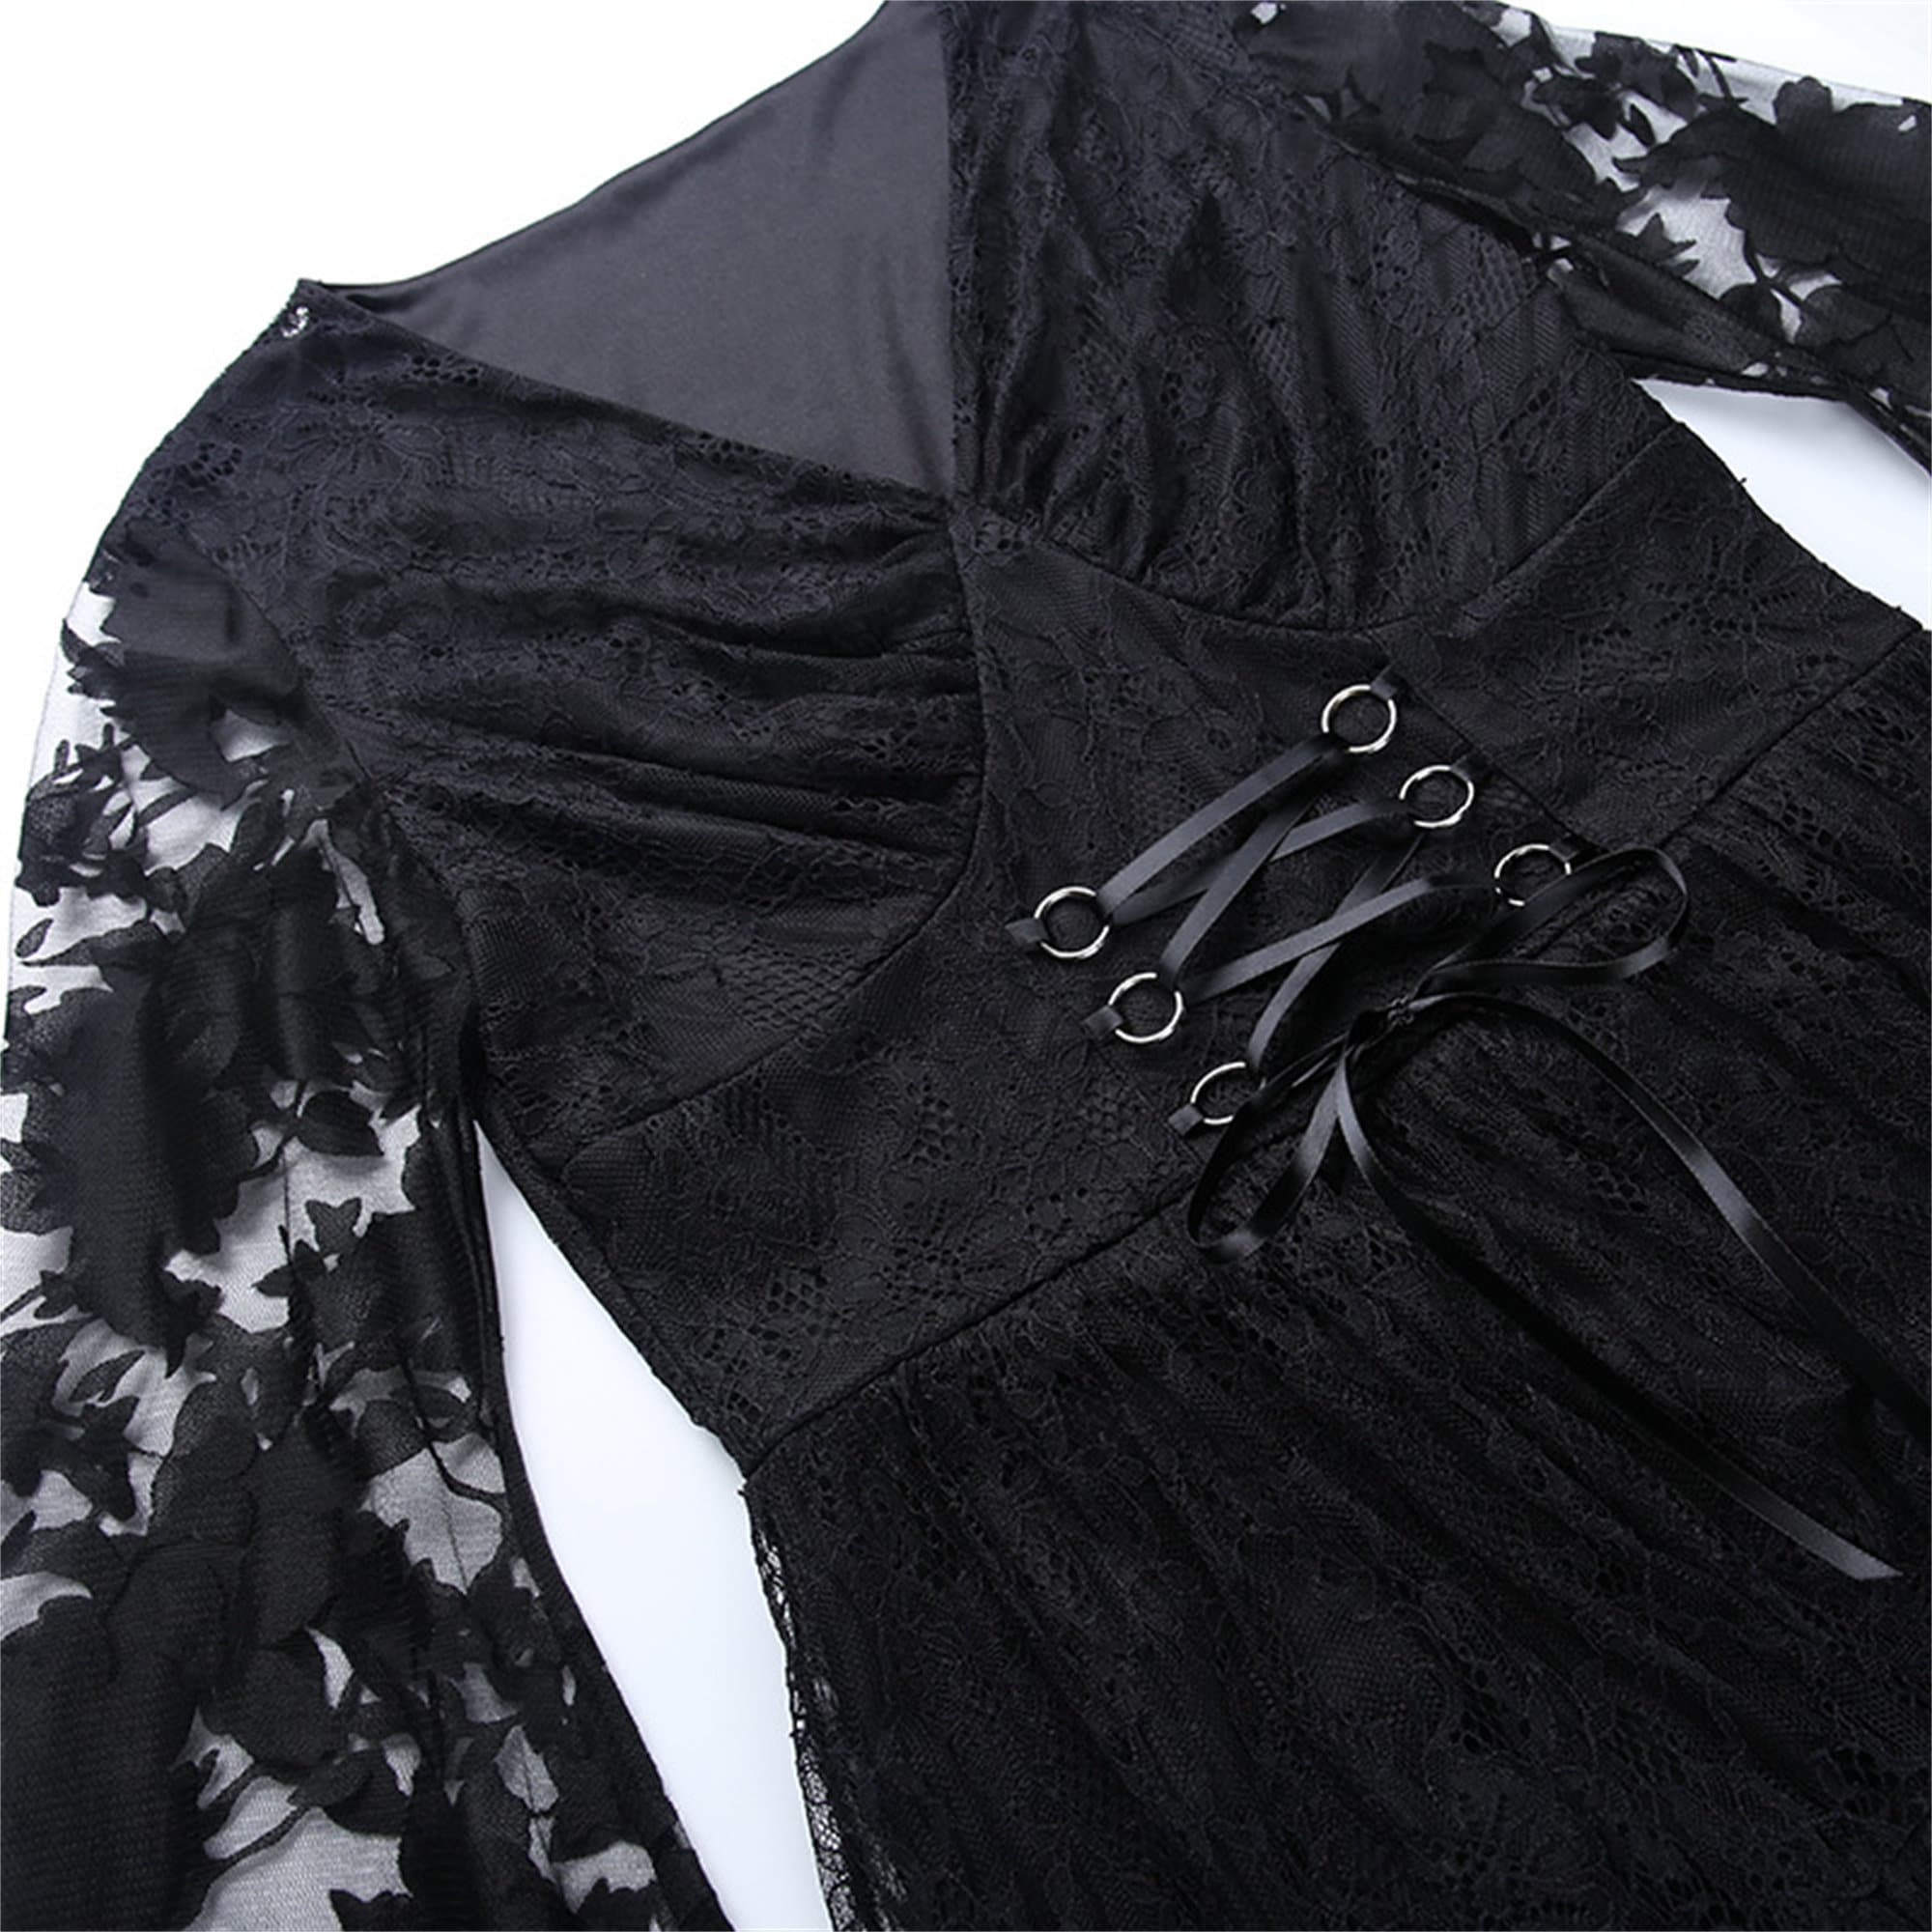 Cold Shoulder Gothic Dress Goth Retro Lace Dress Gothic Long Flared Sleeve Gothic Sexy Lace Up Square Neck Dress Gothic Cosplay Witch Clothe